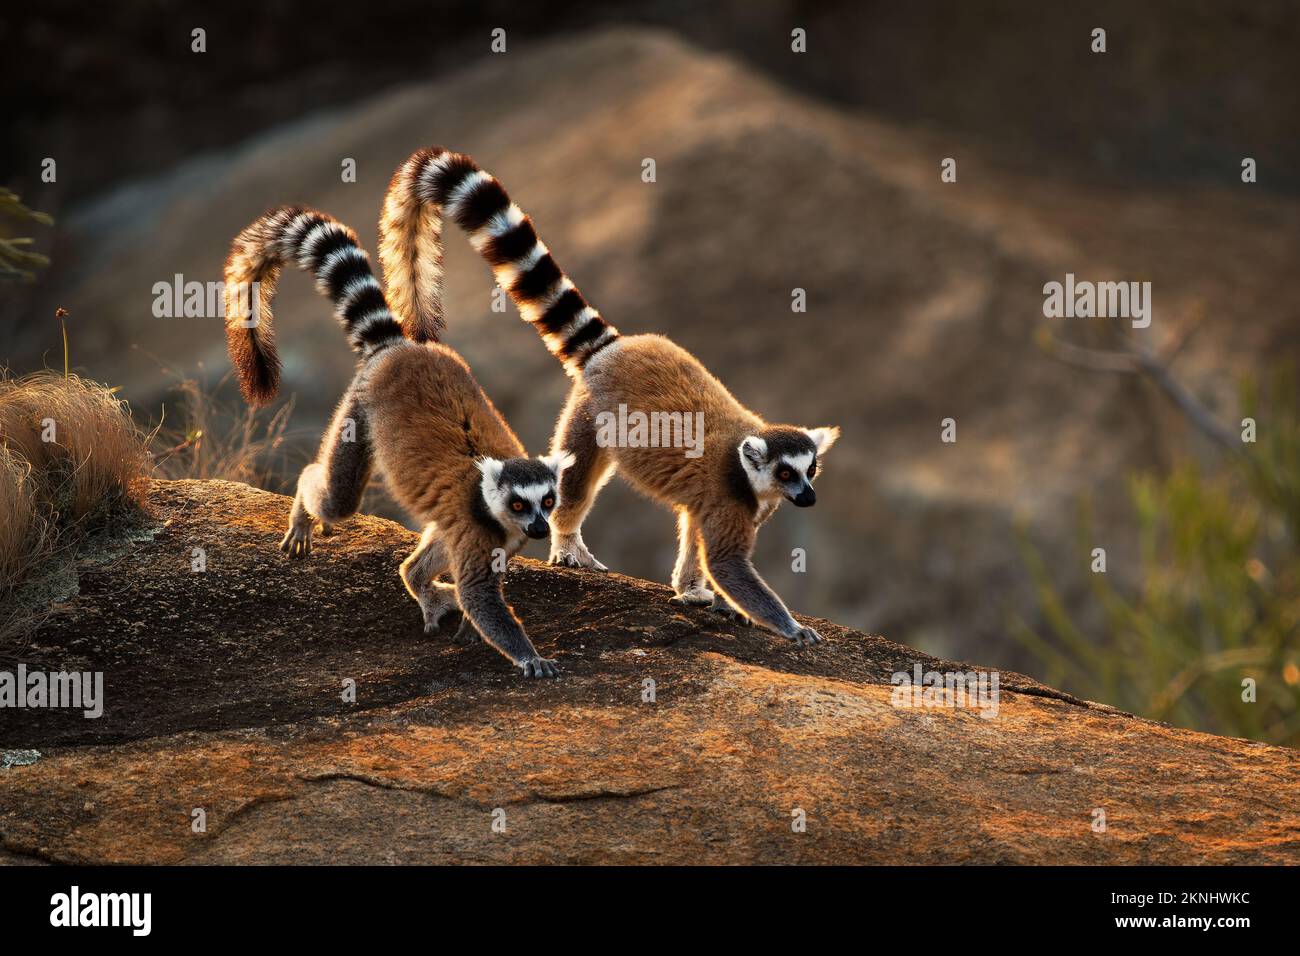 Ring-tailed Lemur - Lemur catta large strepsirrhine primate with long, black and white ringed tail, endemic to Madagascar and endangered, in Malagasy Stock Photo